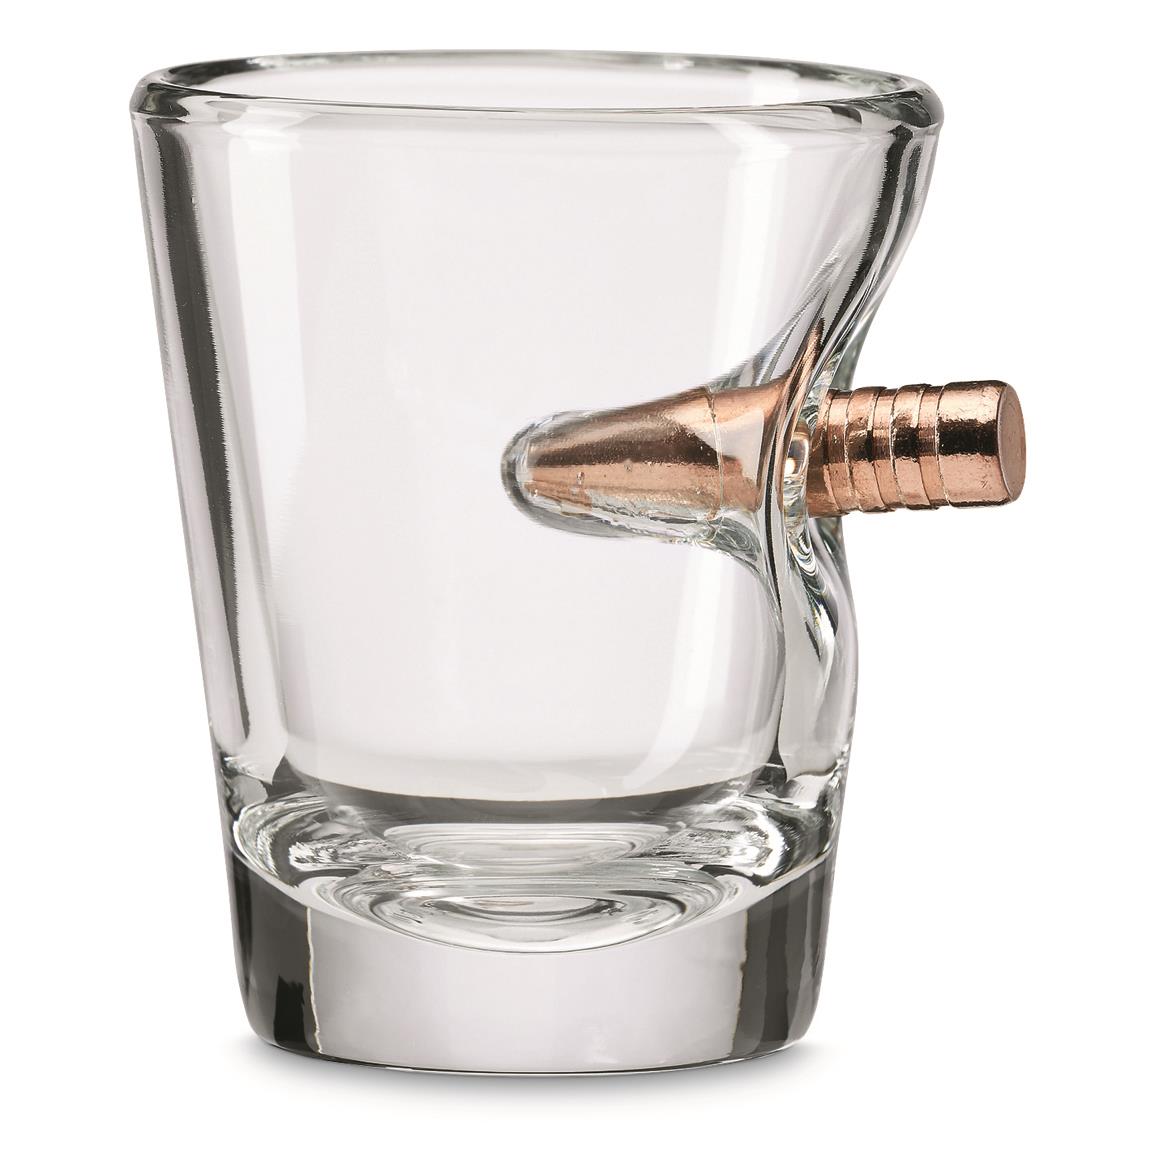 2 OZ AMERICAN SOLDIER "THIS WE'LL DEFEND" NEW SHOT GLASS 